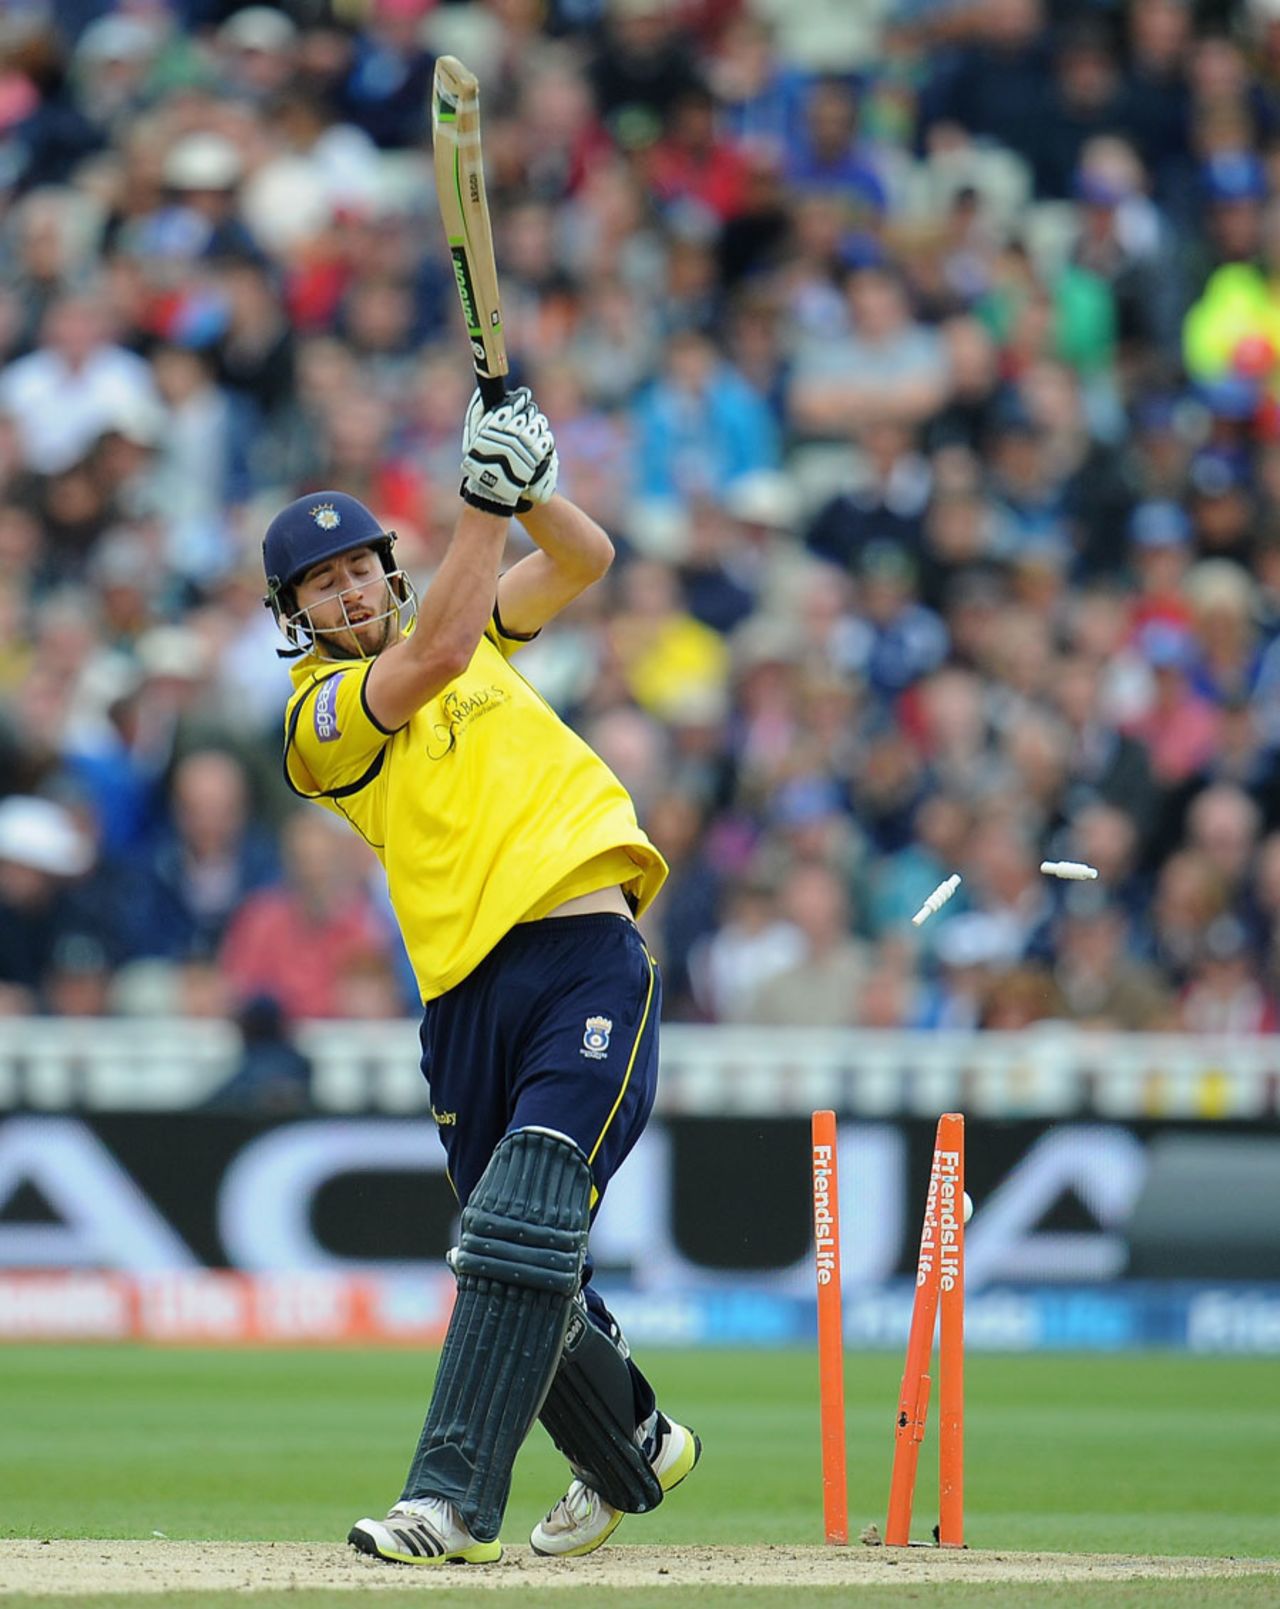 James Vince swings and missed to be bowled early on, Hampshire v Surrey, Friends Life t20, semi-final. Edgbaston, August 17, 2013